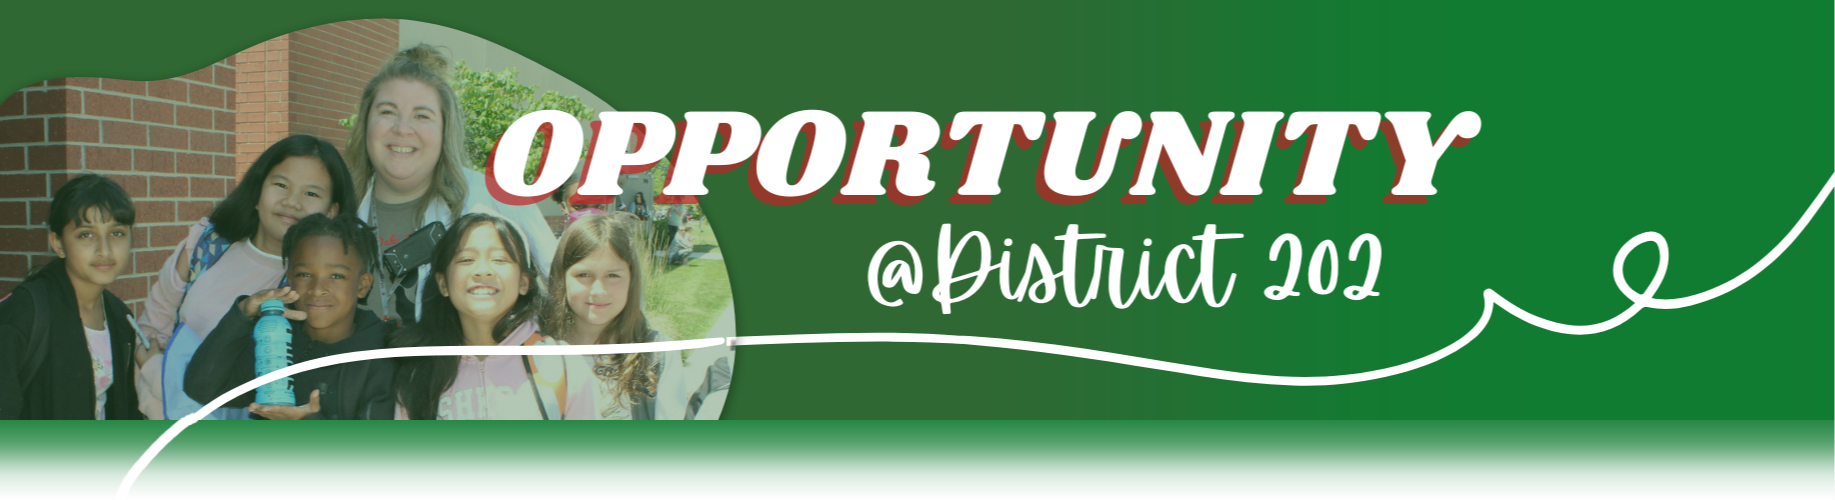 Opportunity @District 202, green background with image of teacher smiling with students